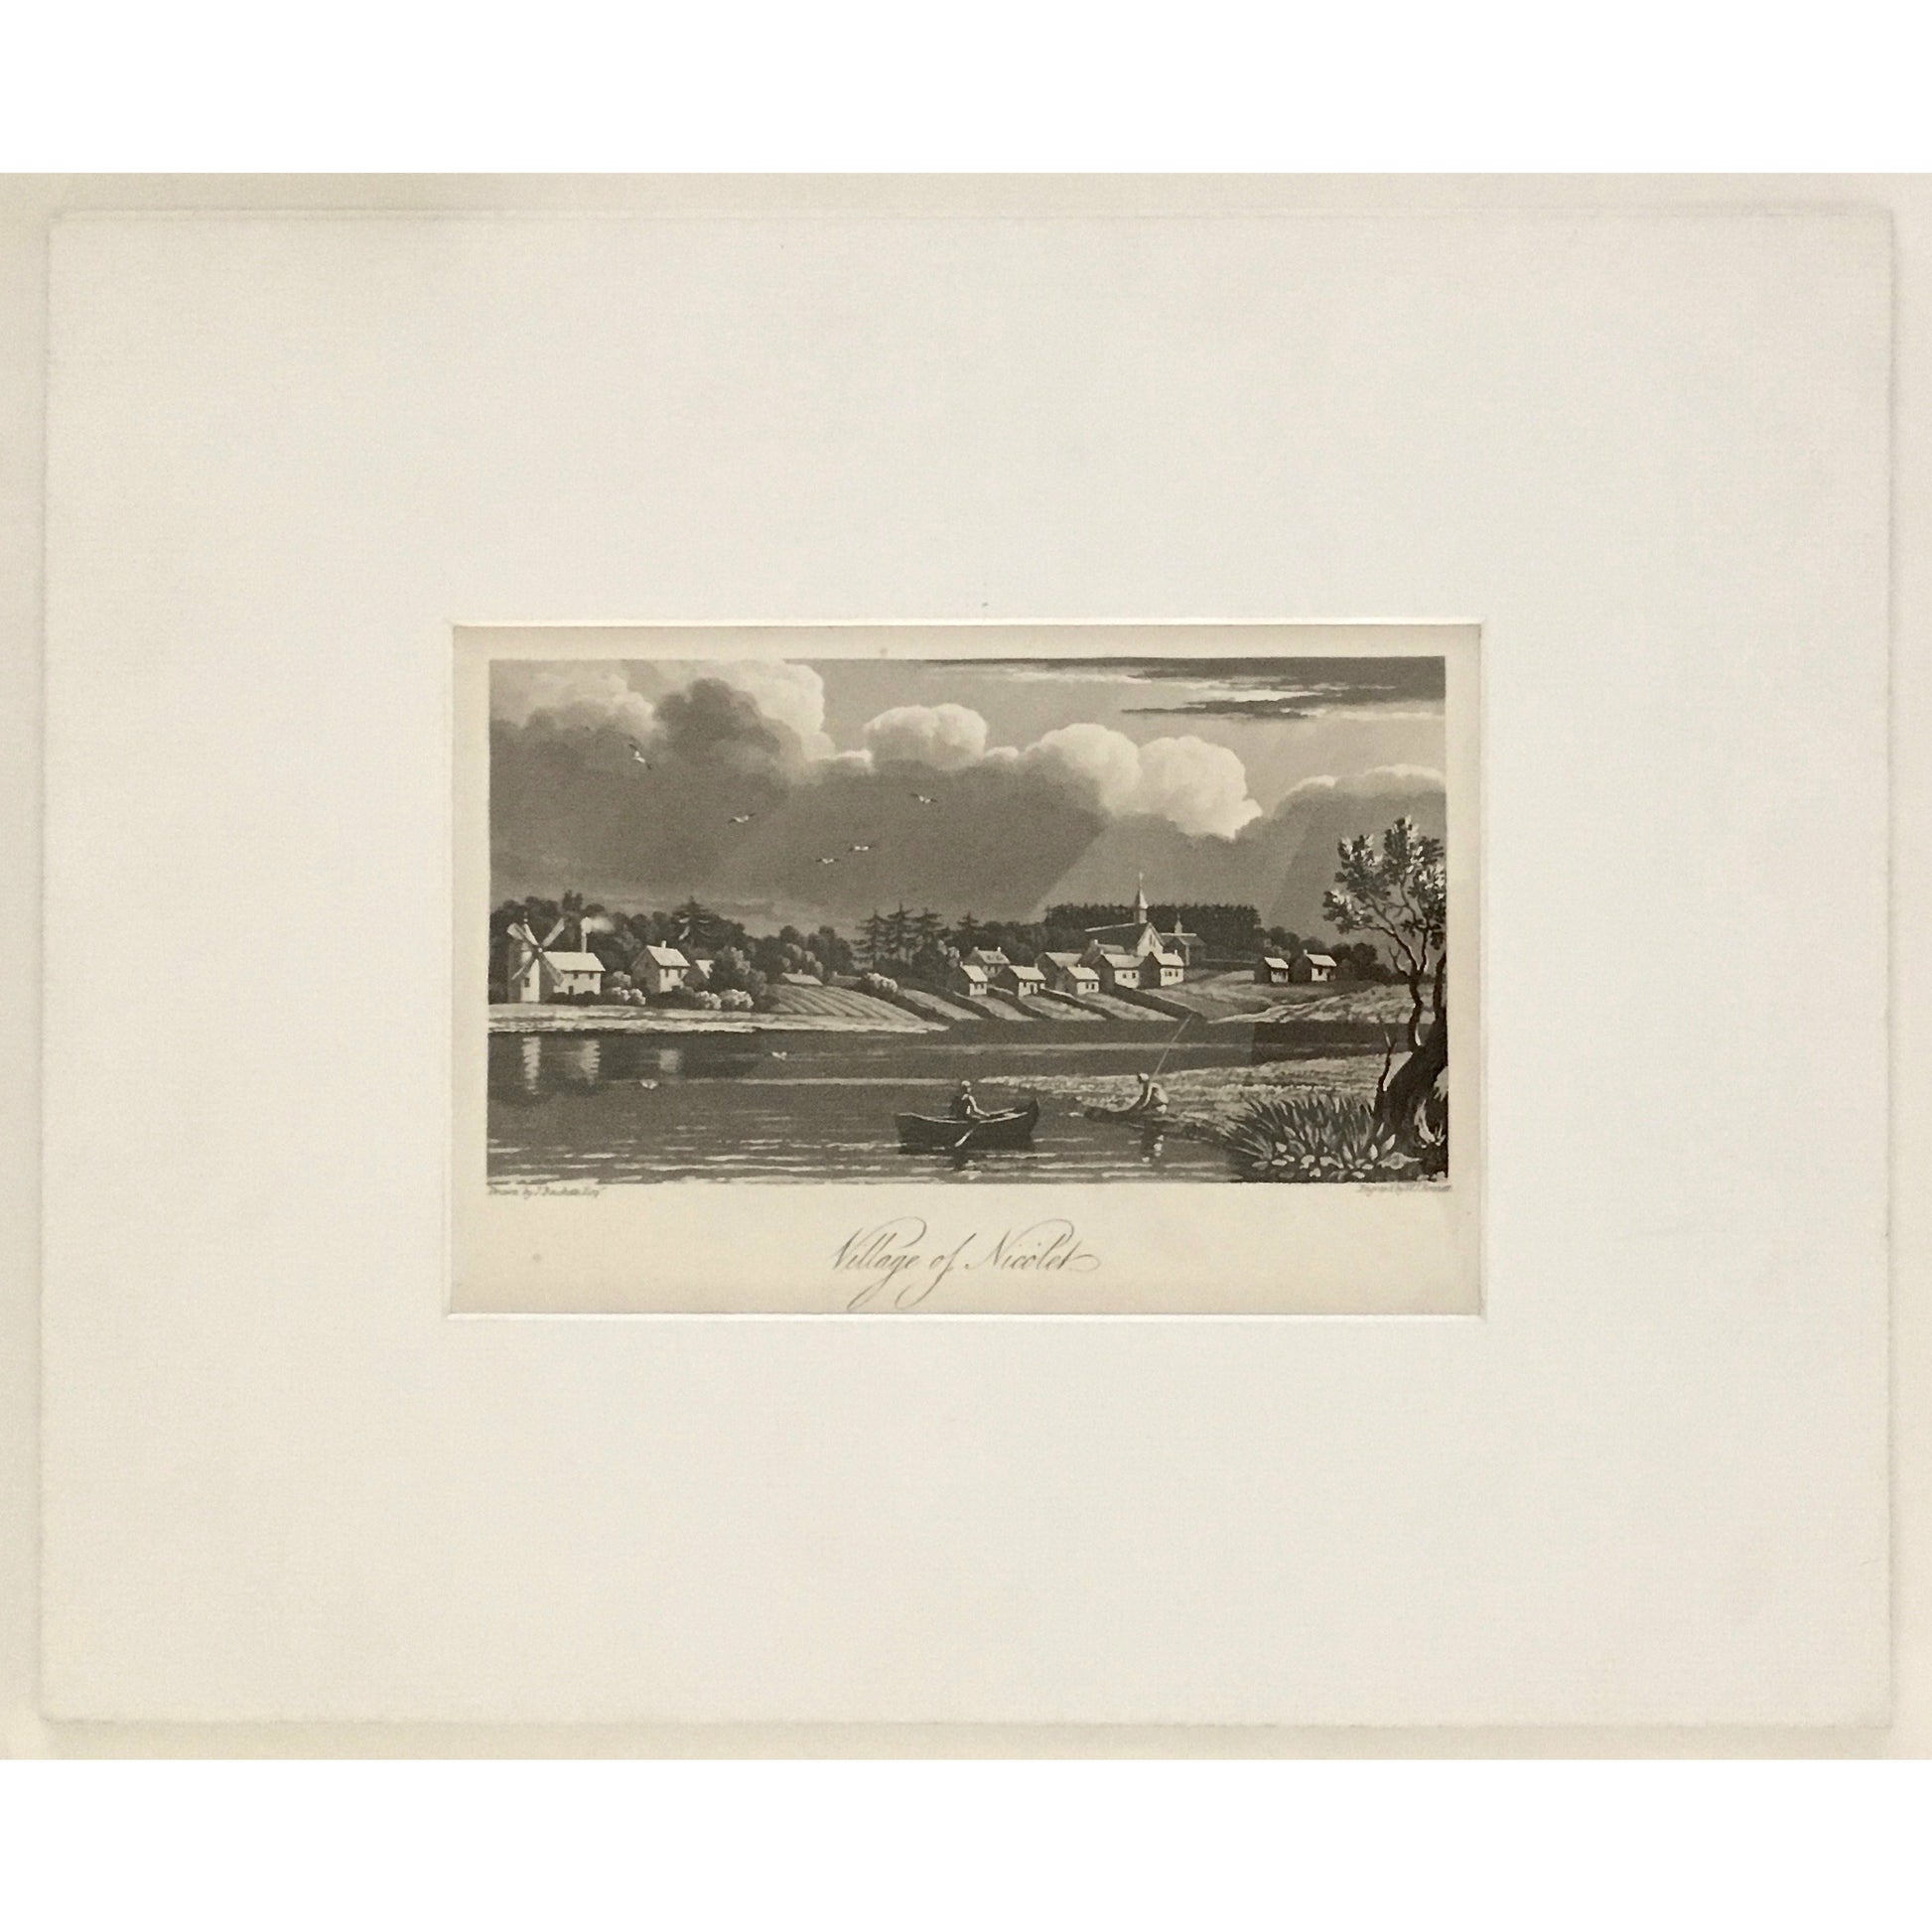 Village, town, Village of Nicolet, Nicolet, windmill, boat, row boat, fishing, church, canadian town, A Topographical Description of the Province of Lower Canada, Lower Canada, Joseph Bouchette, Bouchette, 1815, W. Faden, Faden, W. J. Bennett, Bennett, Charing Cross, London, steel engraving, black and white, matted, Antique Prints, Prints, Antiques, Art, Home Decor, Design, Interior Decor, Wall art, Engraving, History of Art, 